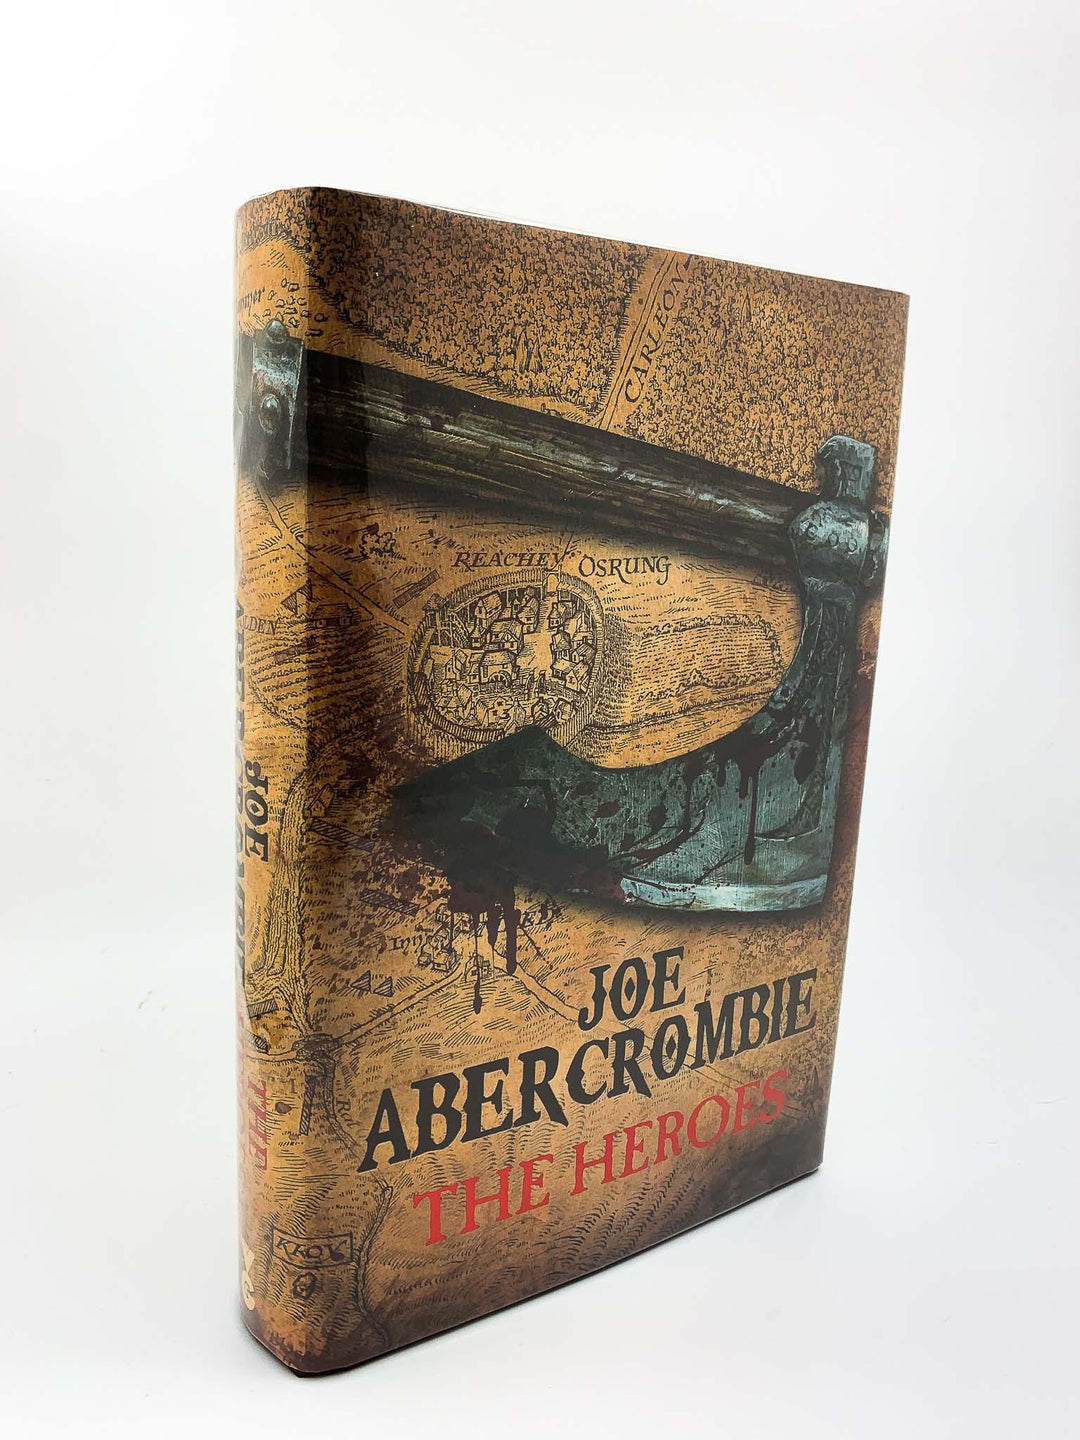 Abercrombie, Joe - The Heroes - SIGNED | front cover